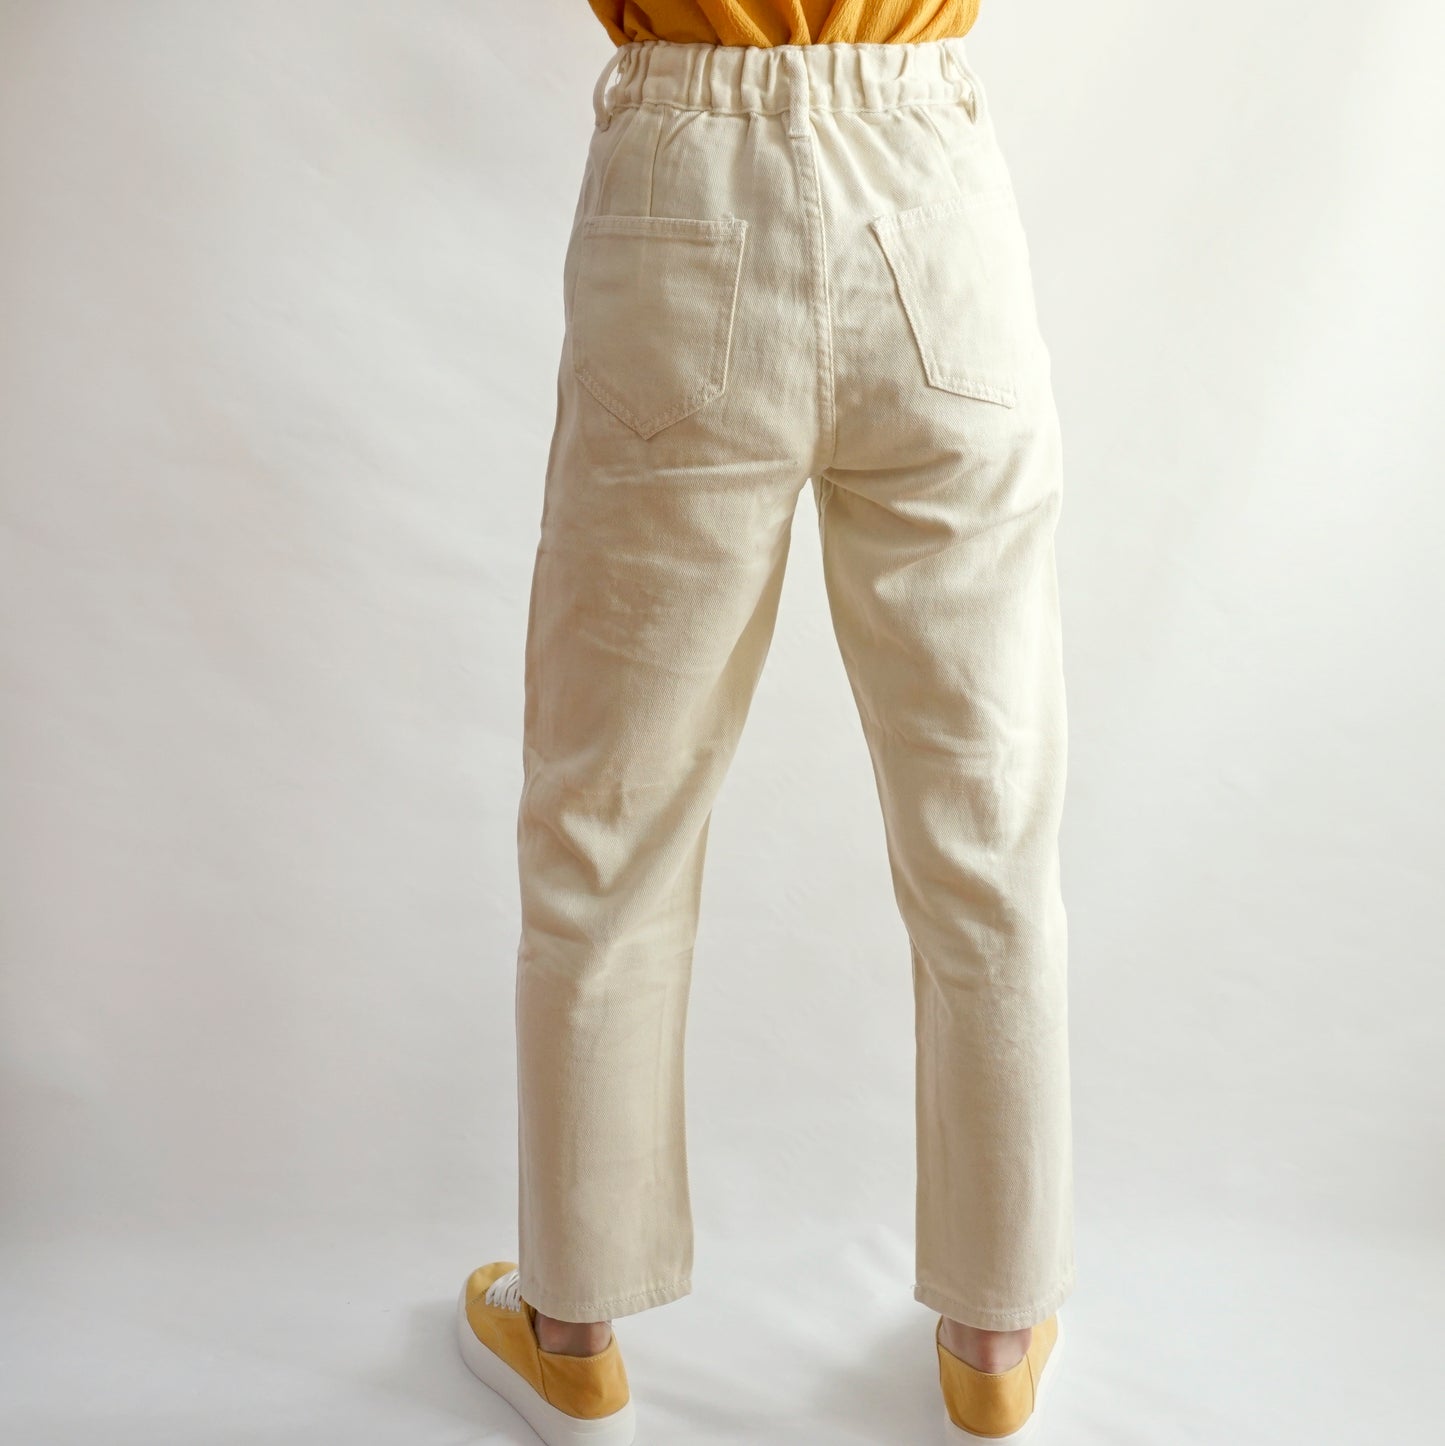 Cropped Mom Jeans (Cream)